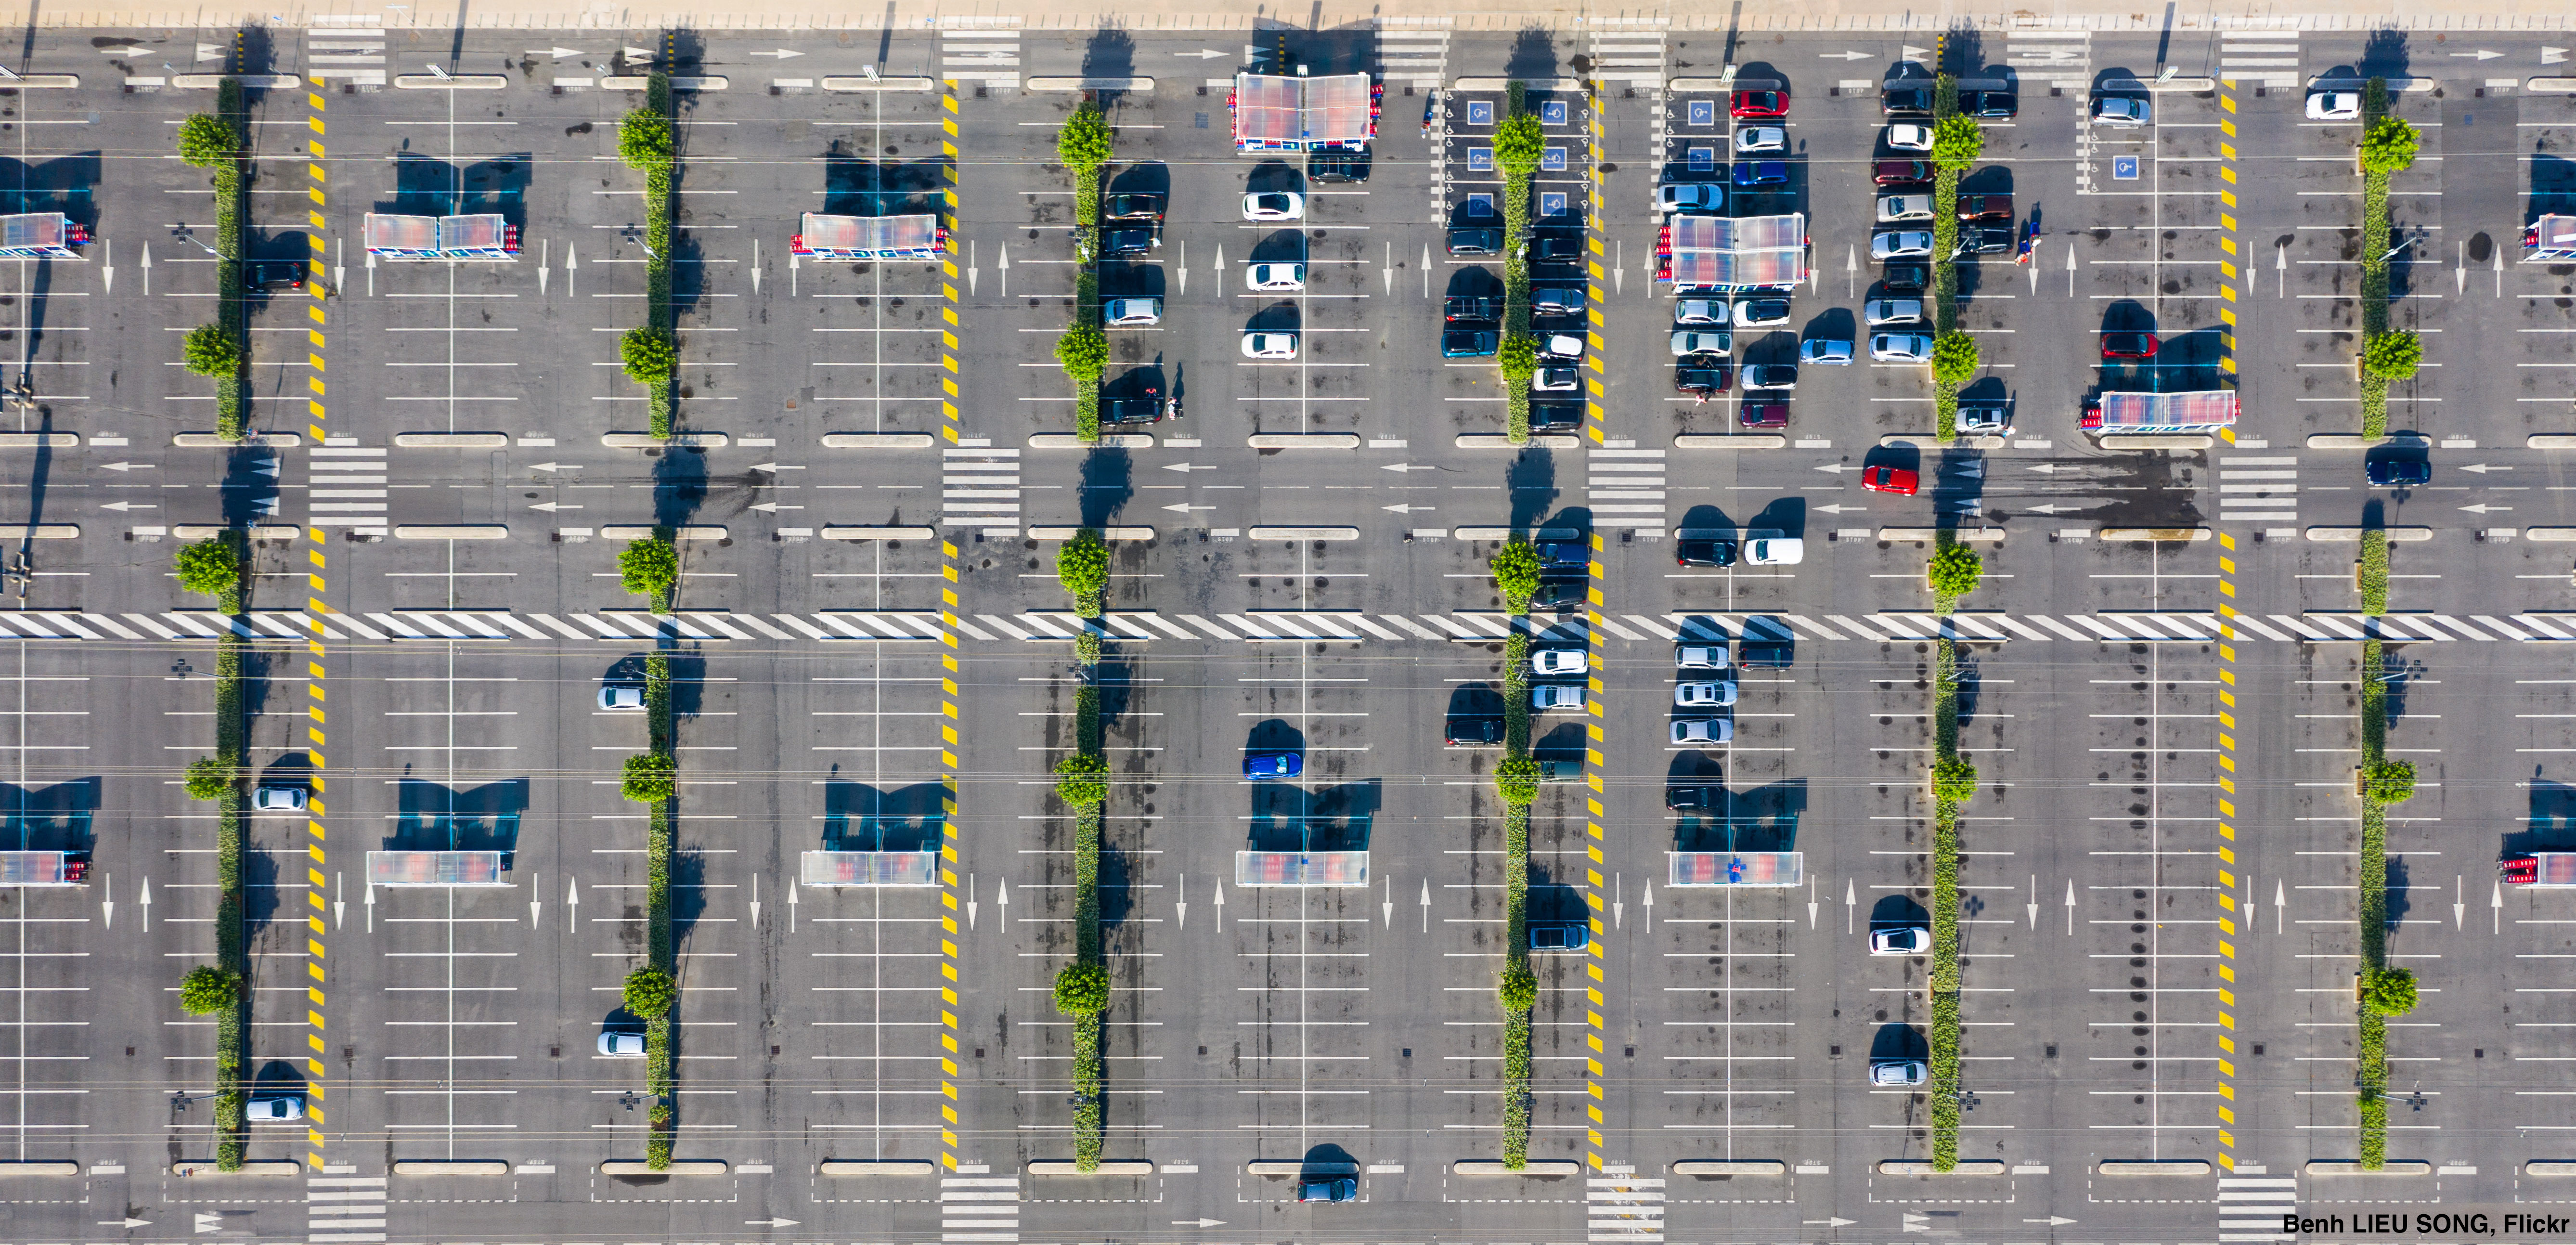 This little-known rule shapes parking in America. Cities are